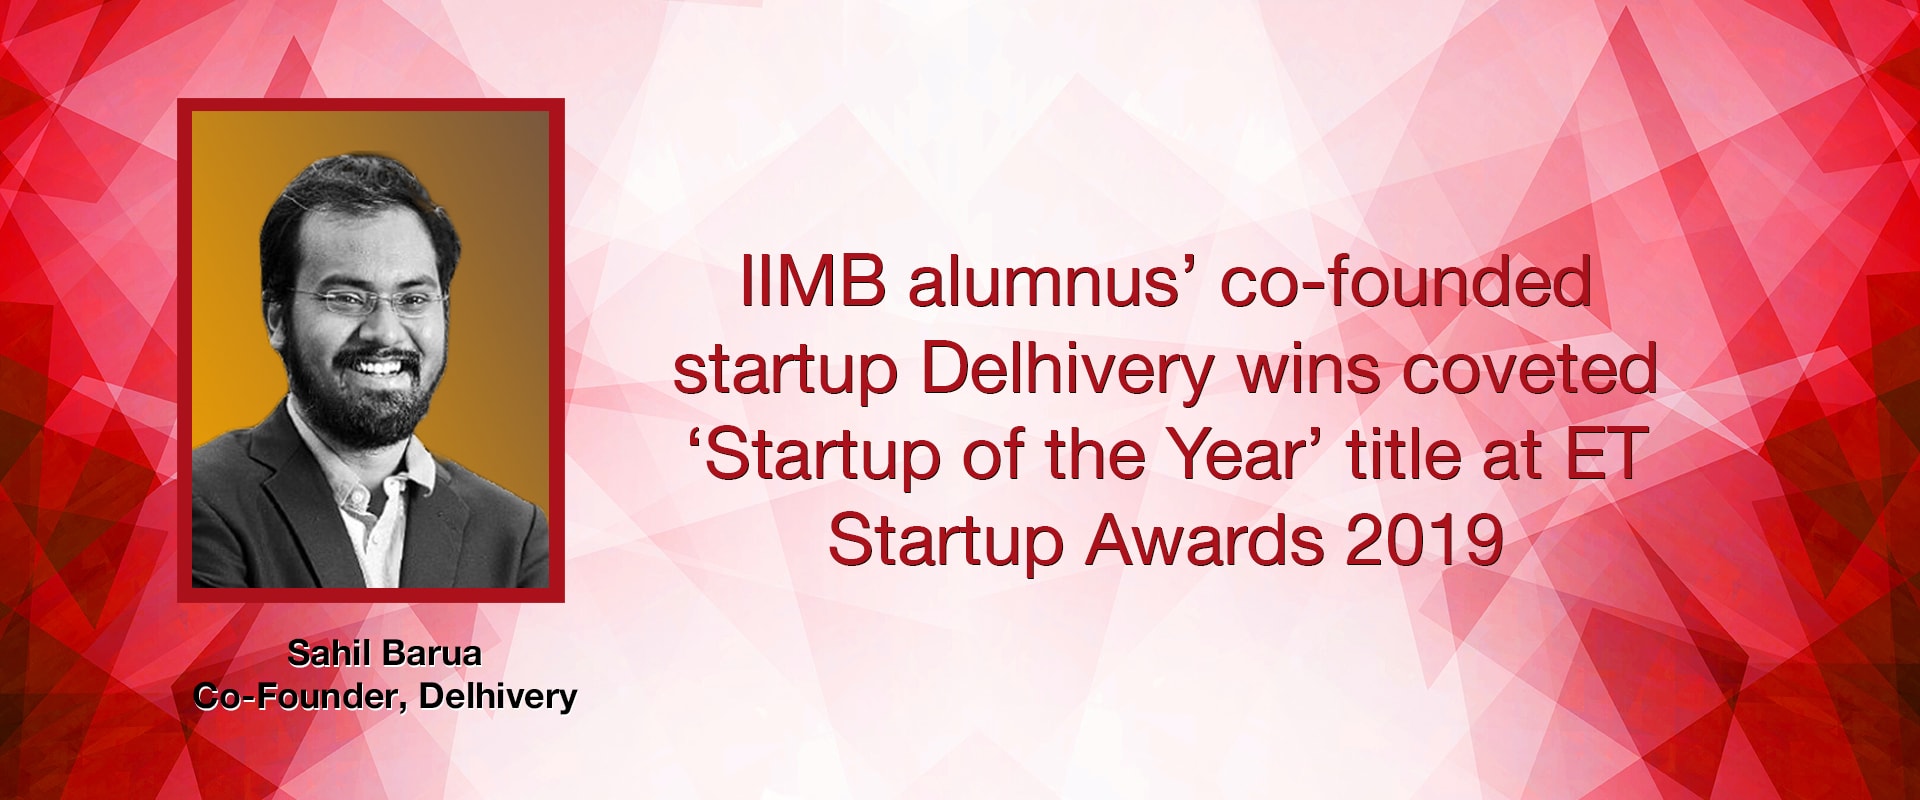 IIMB alumnus’ co-founded startup Delhivery wins coveted ‘Startup of the Year’ title at ET Startup Awards 2019